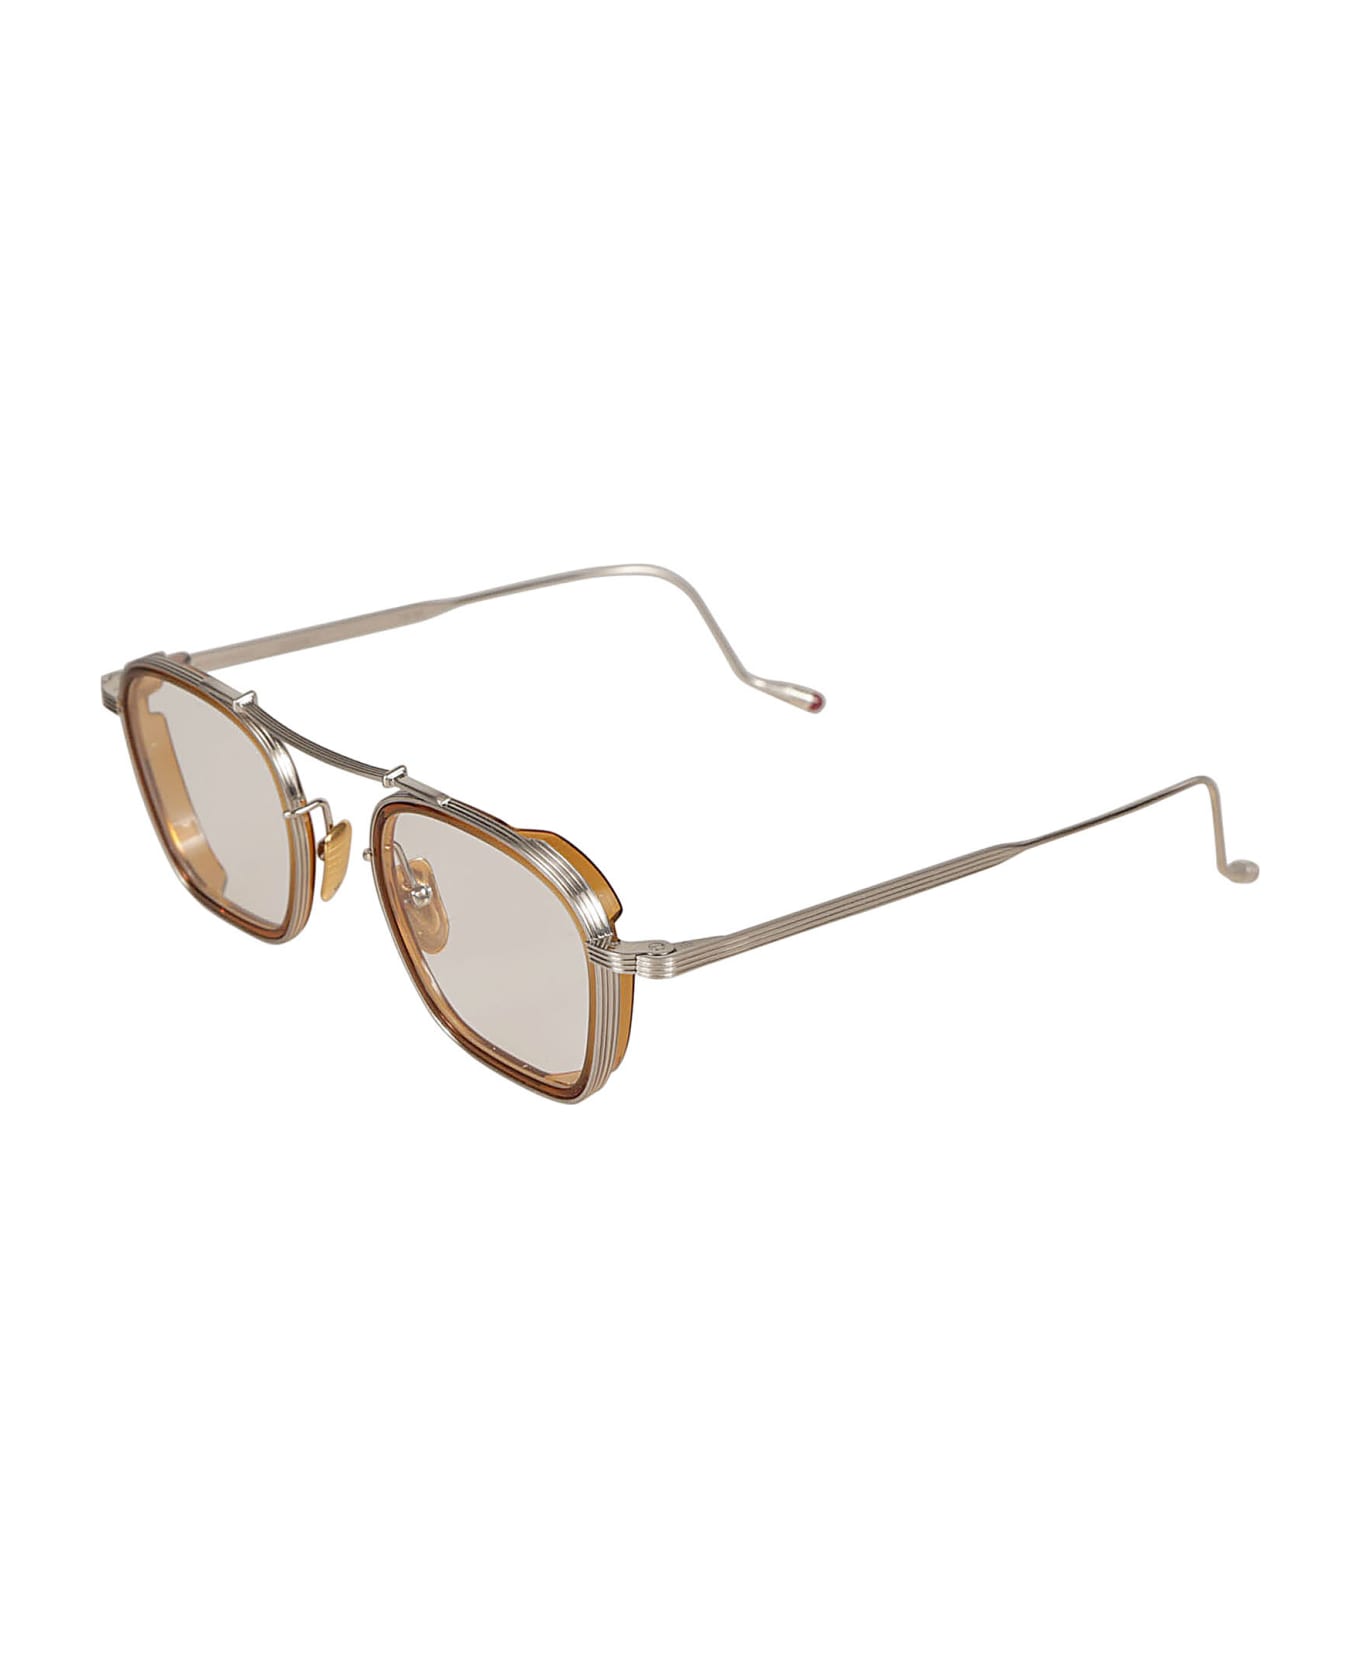 Jacques Marie Mage Baudelaire 2 Frame Glasses - Silver アイウェア